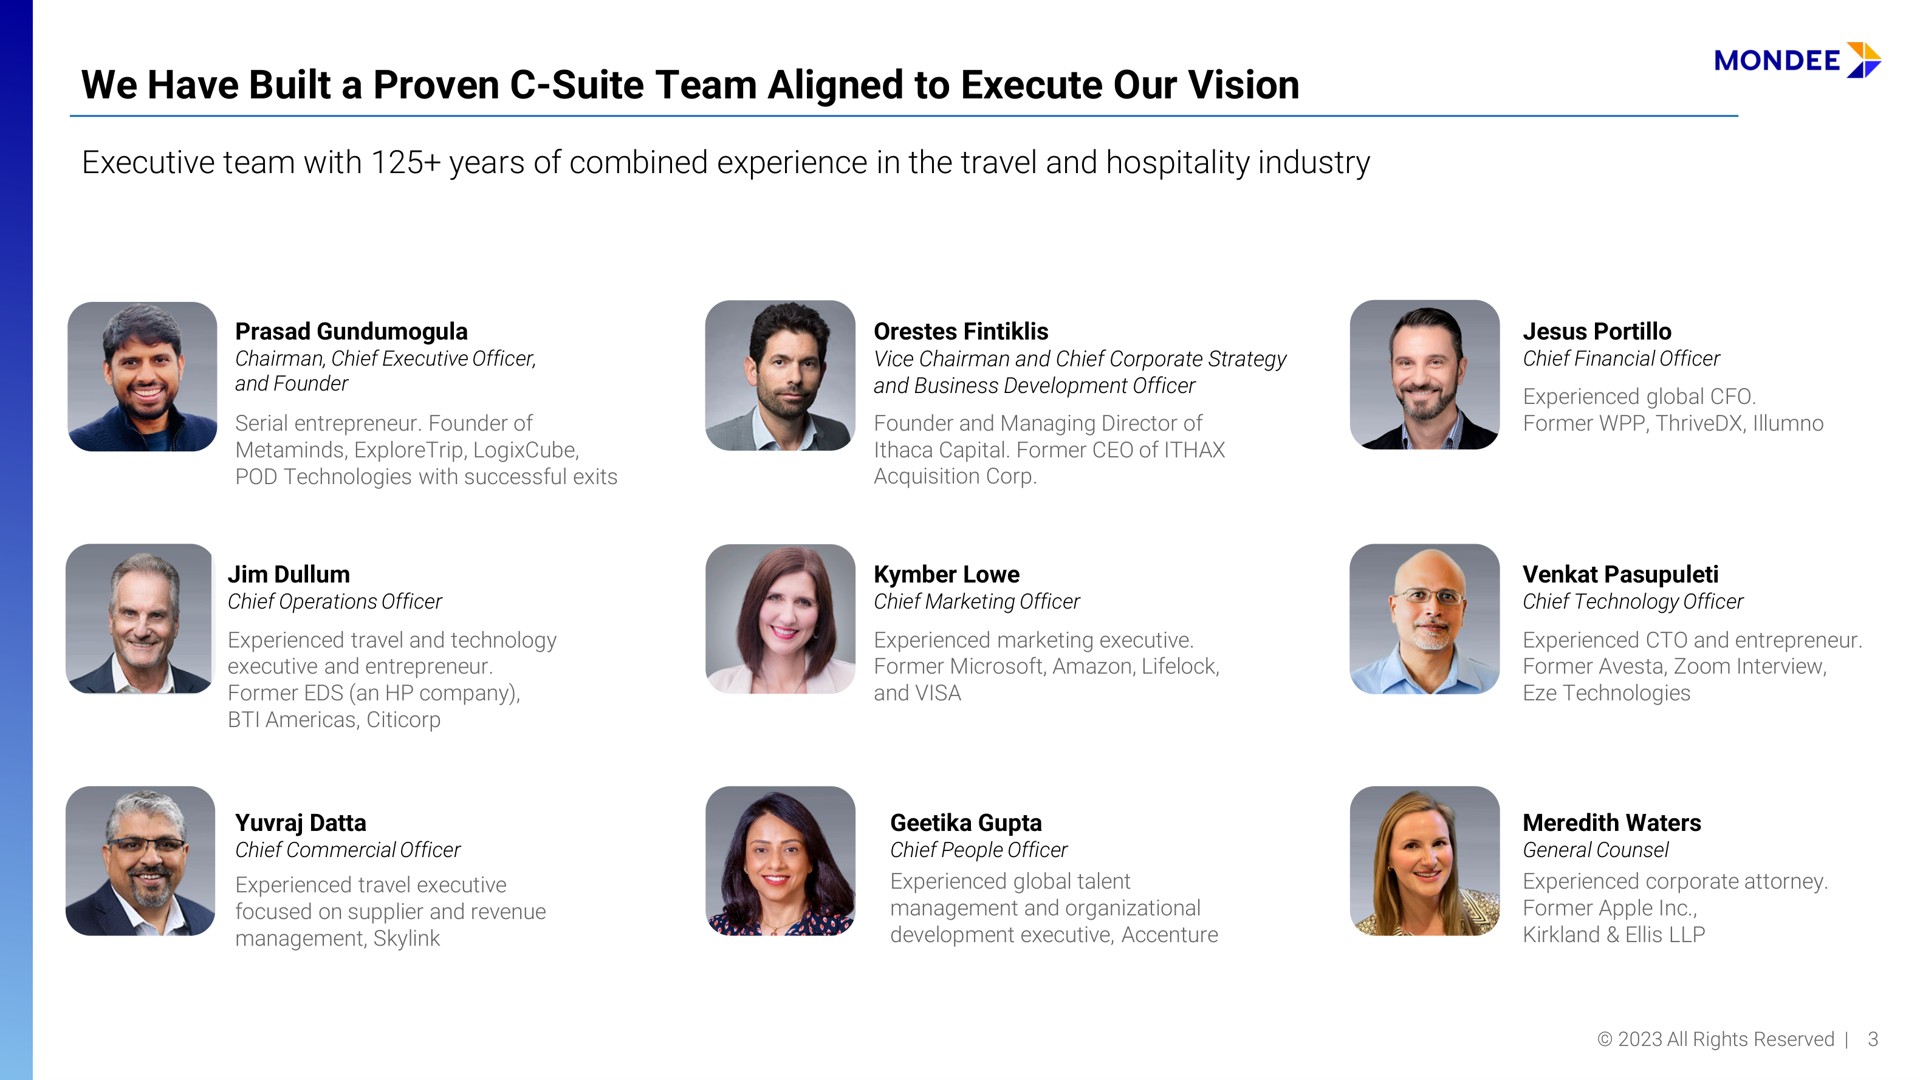 we have built a proven suite team aligned to execute our vision i | Mondee